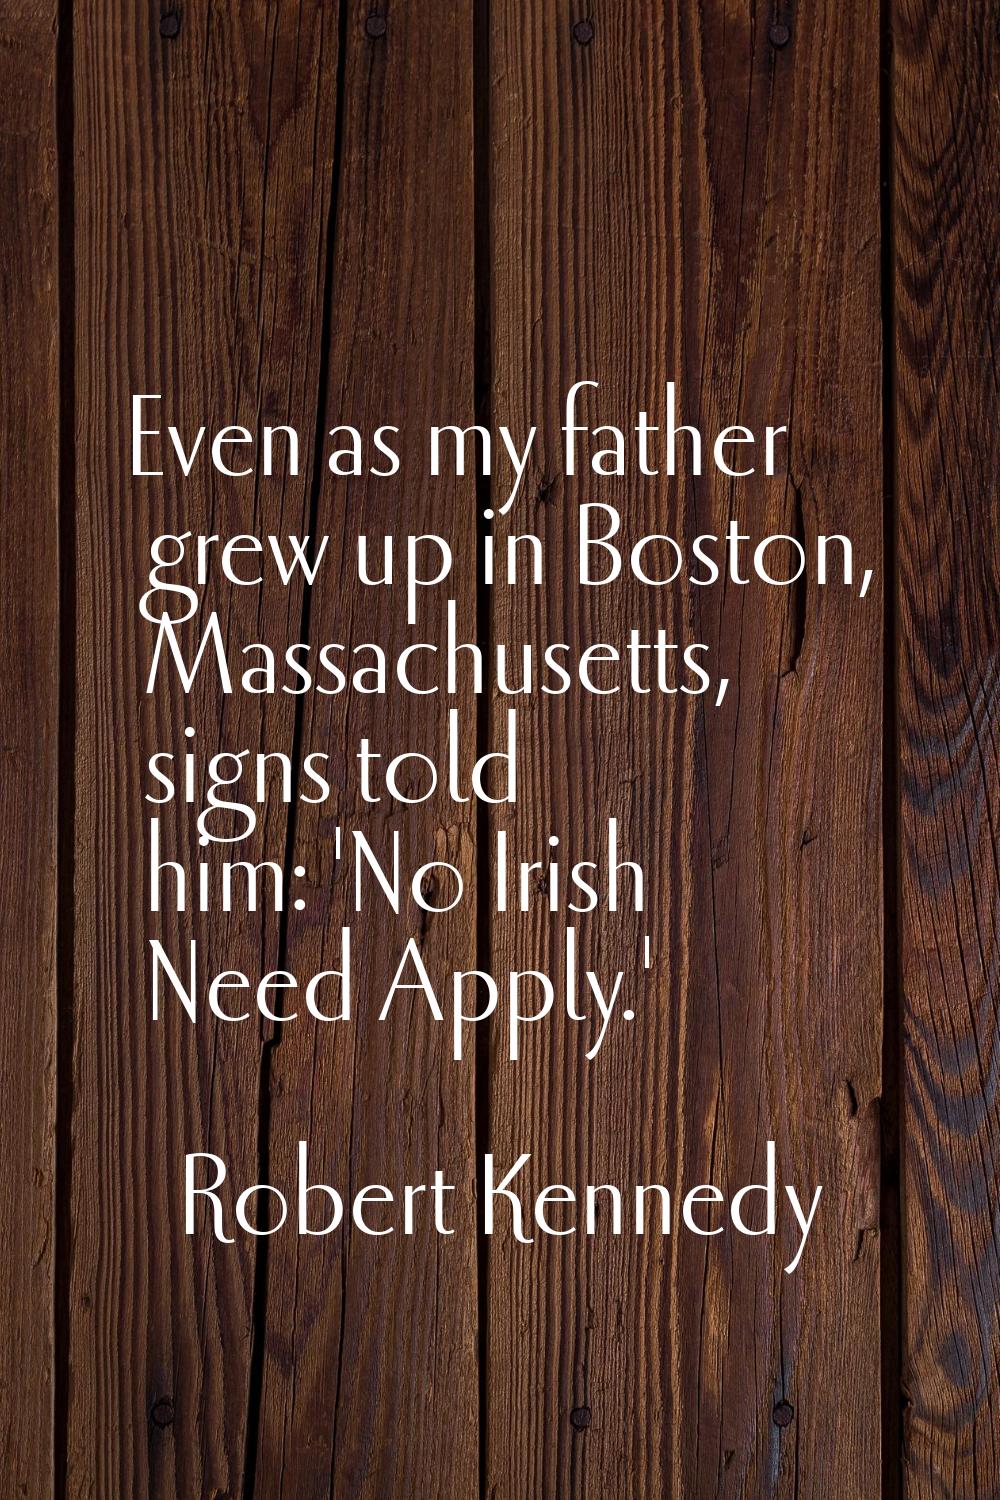 Even as my father grew up in Boston, Massachusetts, signs told him: 'No Irish Need Apply.'